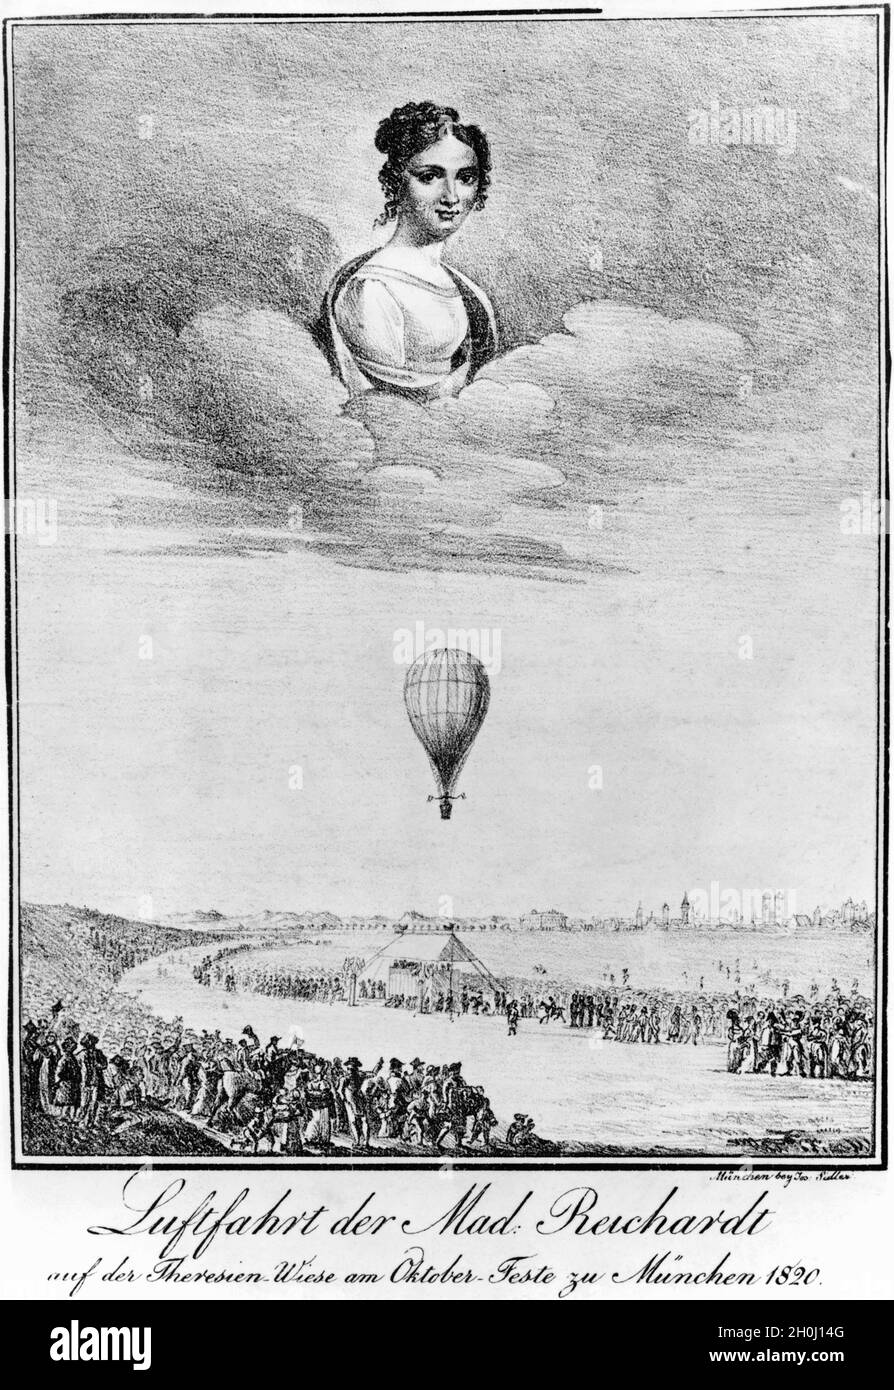 Balloon flight of Wilhelmine Reichardt over the Theresienwiese at the Oktoberfest 1820 in Munich. [automated translation] Stock Photo